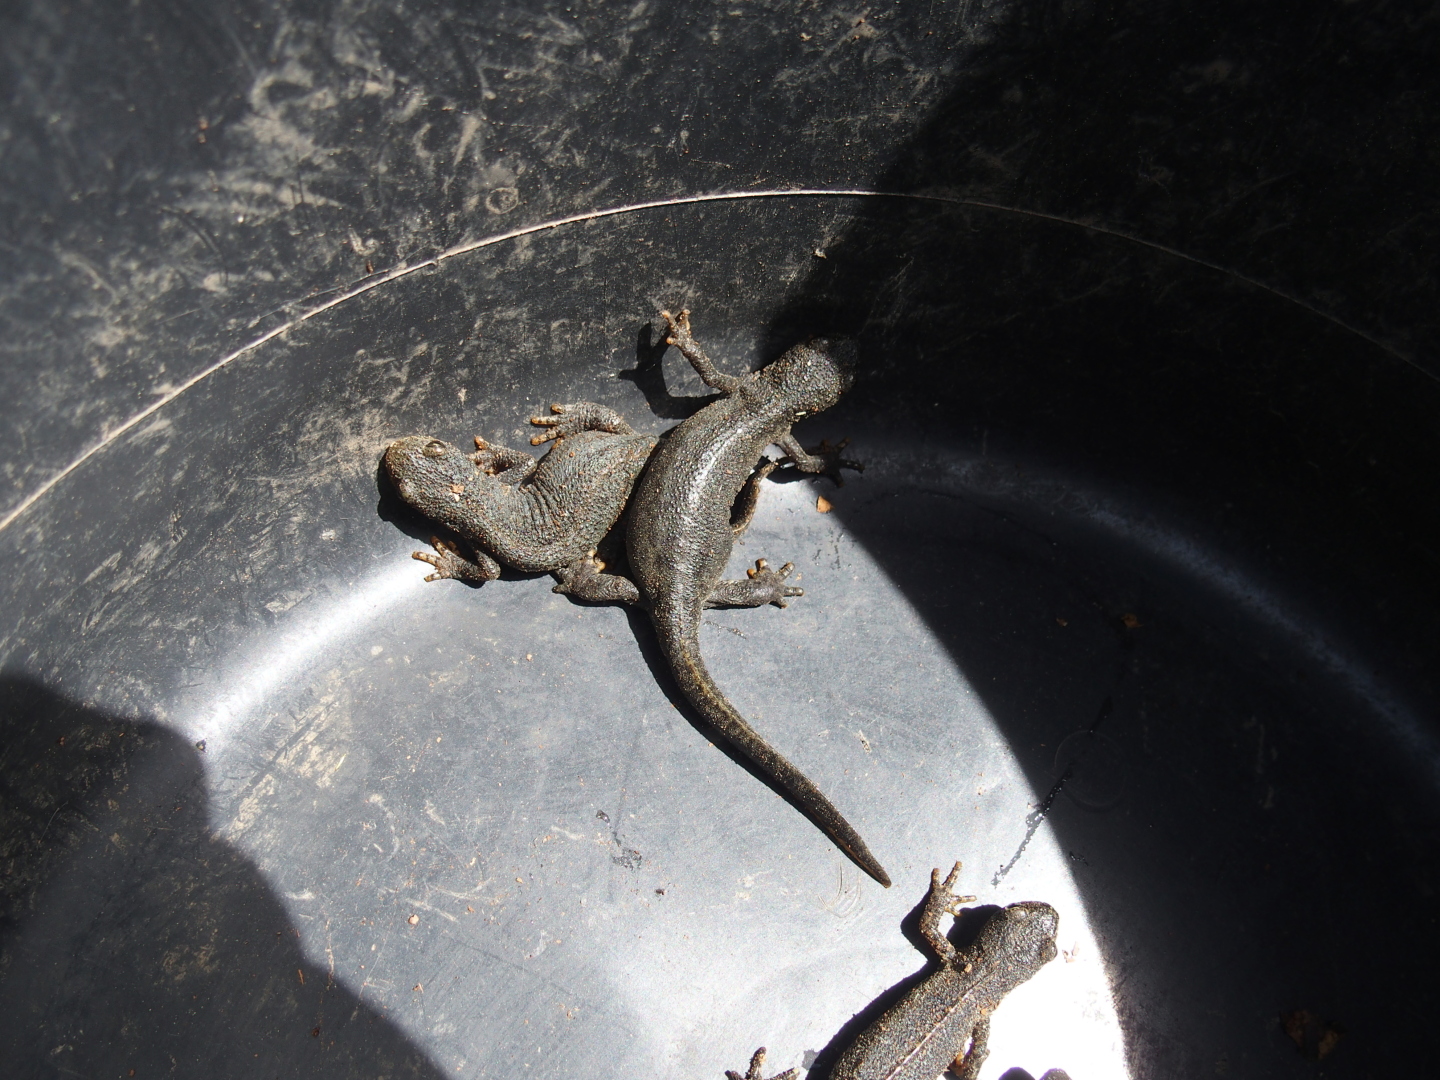 We met two members of NABU checking toad fences. Here is what they found: several alpine newts.